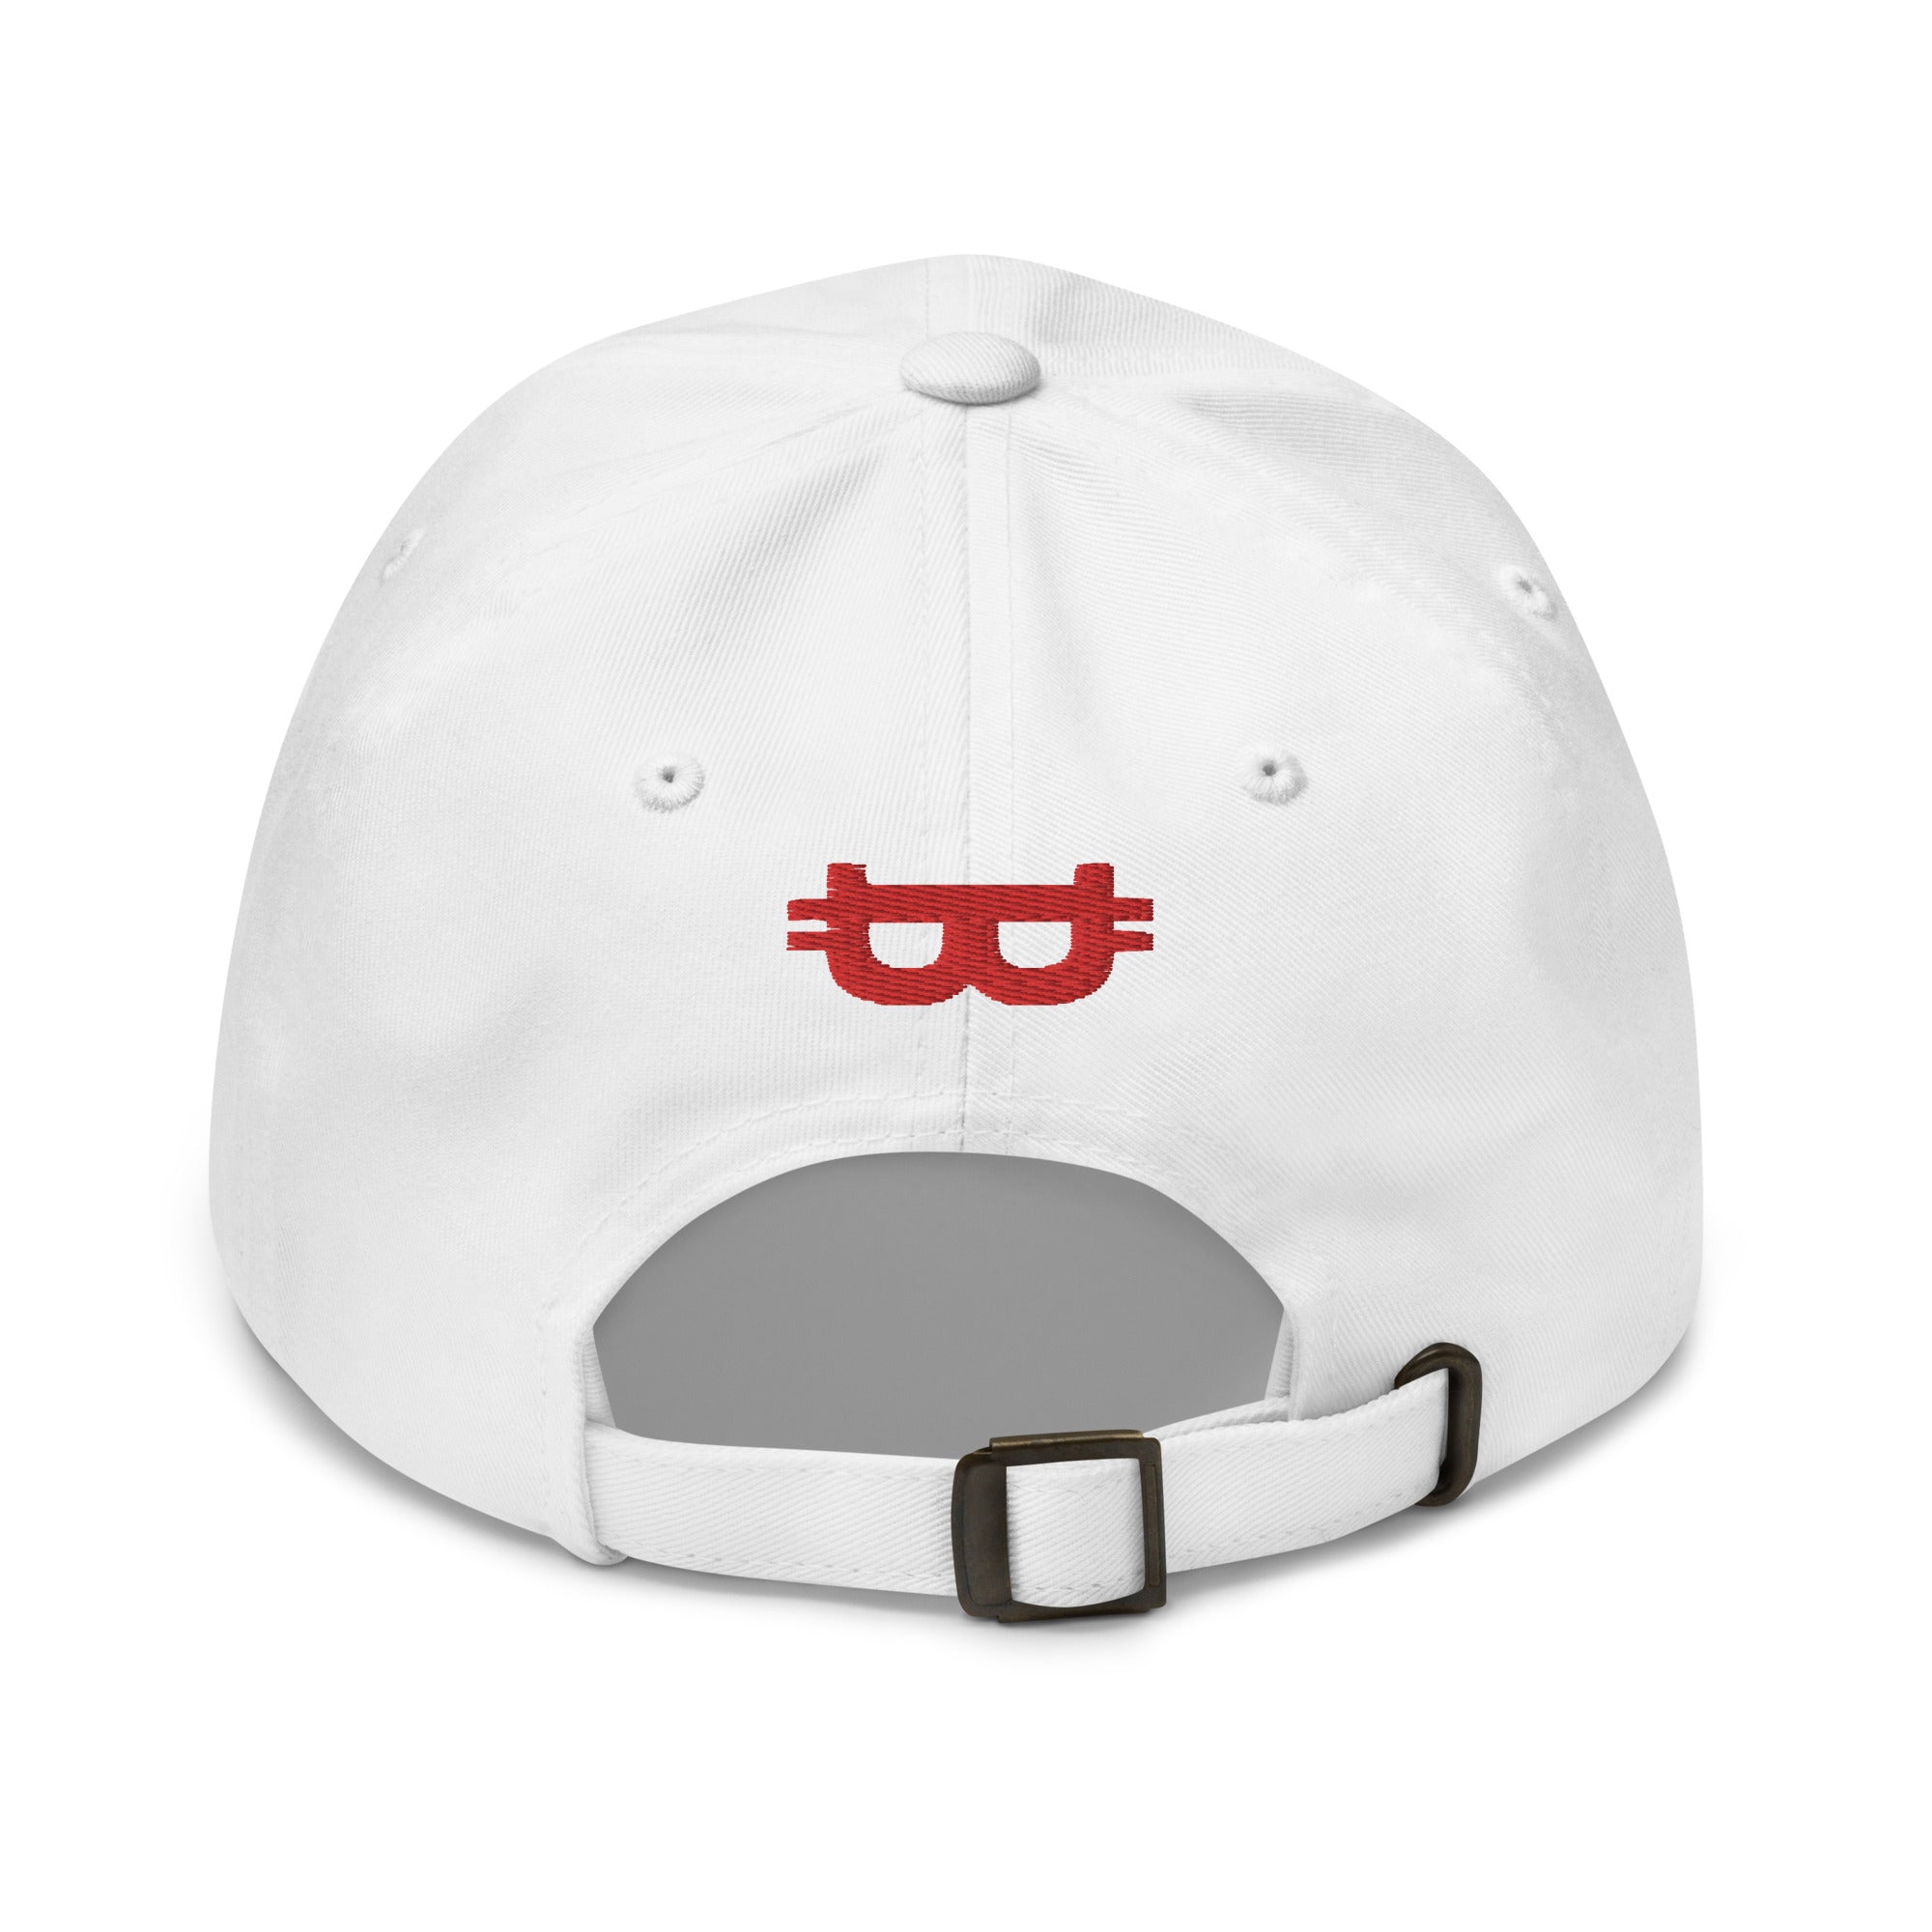 Bitcoin Merchandise - The Satoshi Hat (Red Logo) features embroidered designs on the front and back of a white cap. Back view. 